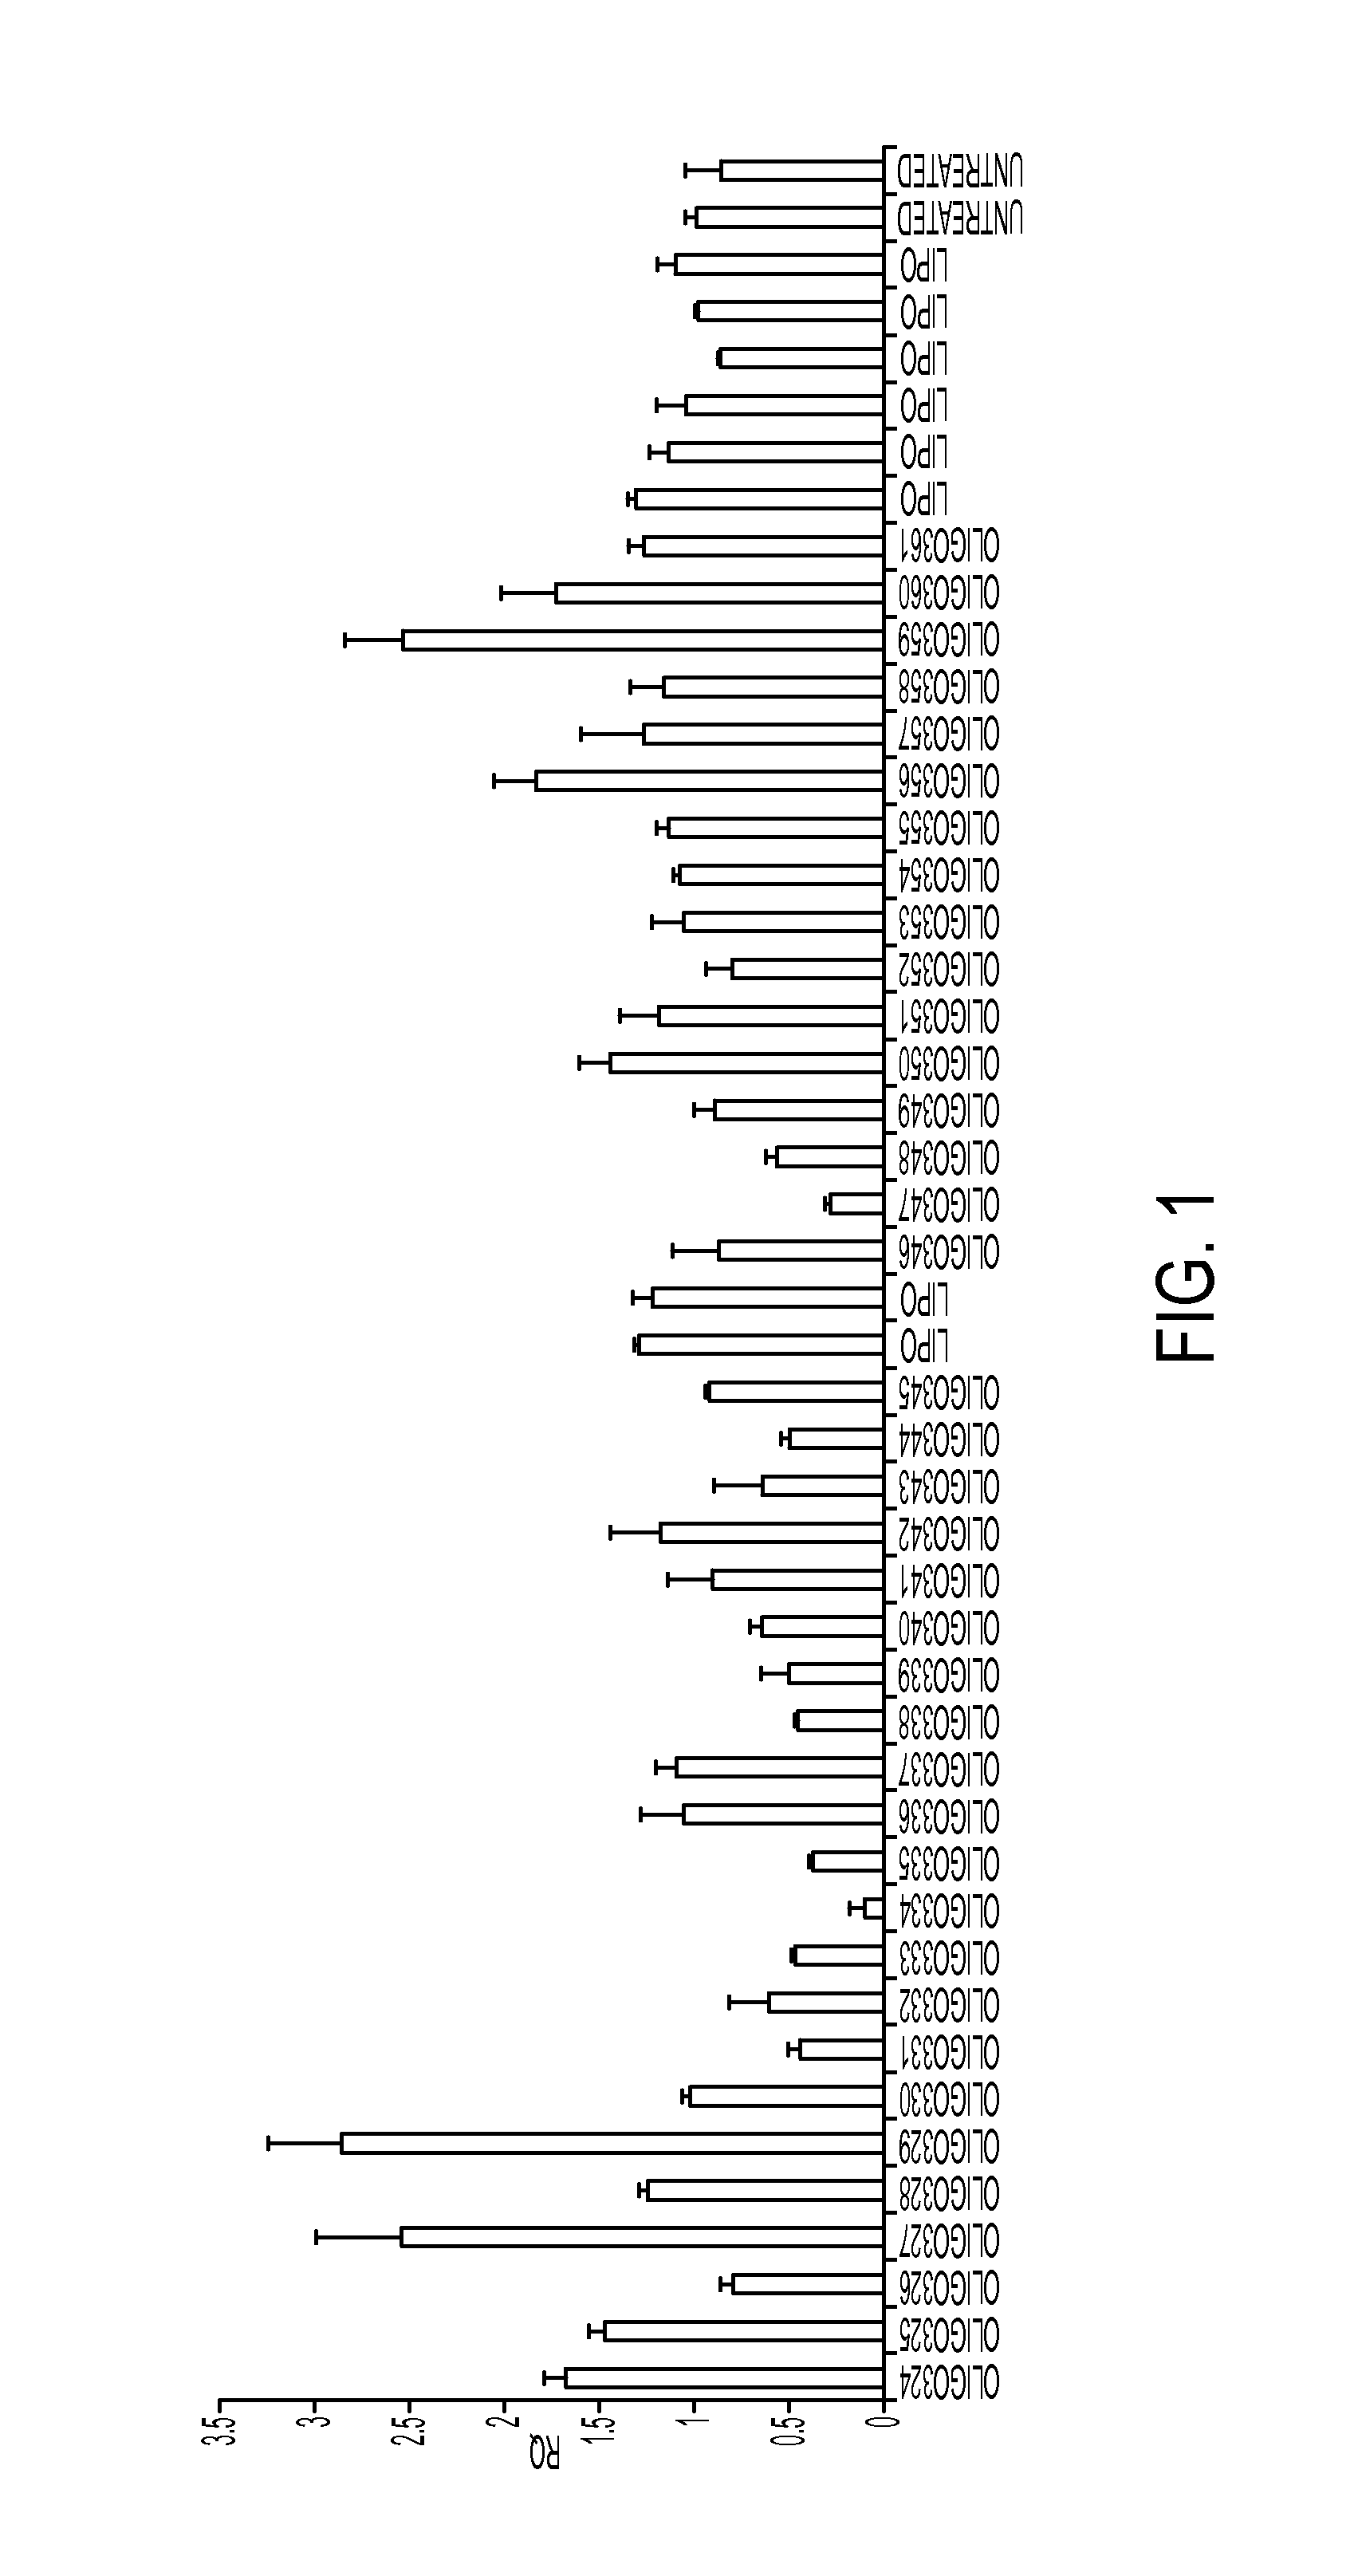 Compositions and methods for modulating expression of frataxin